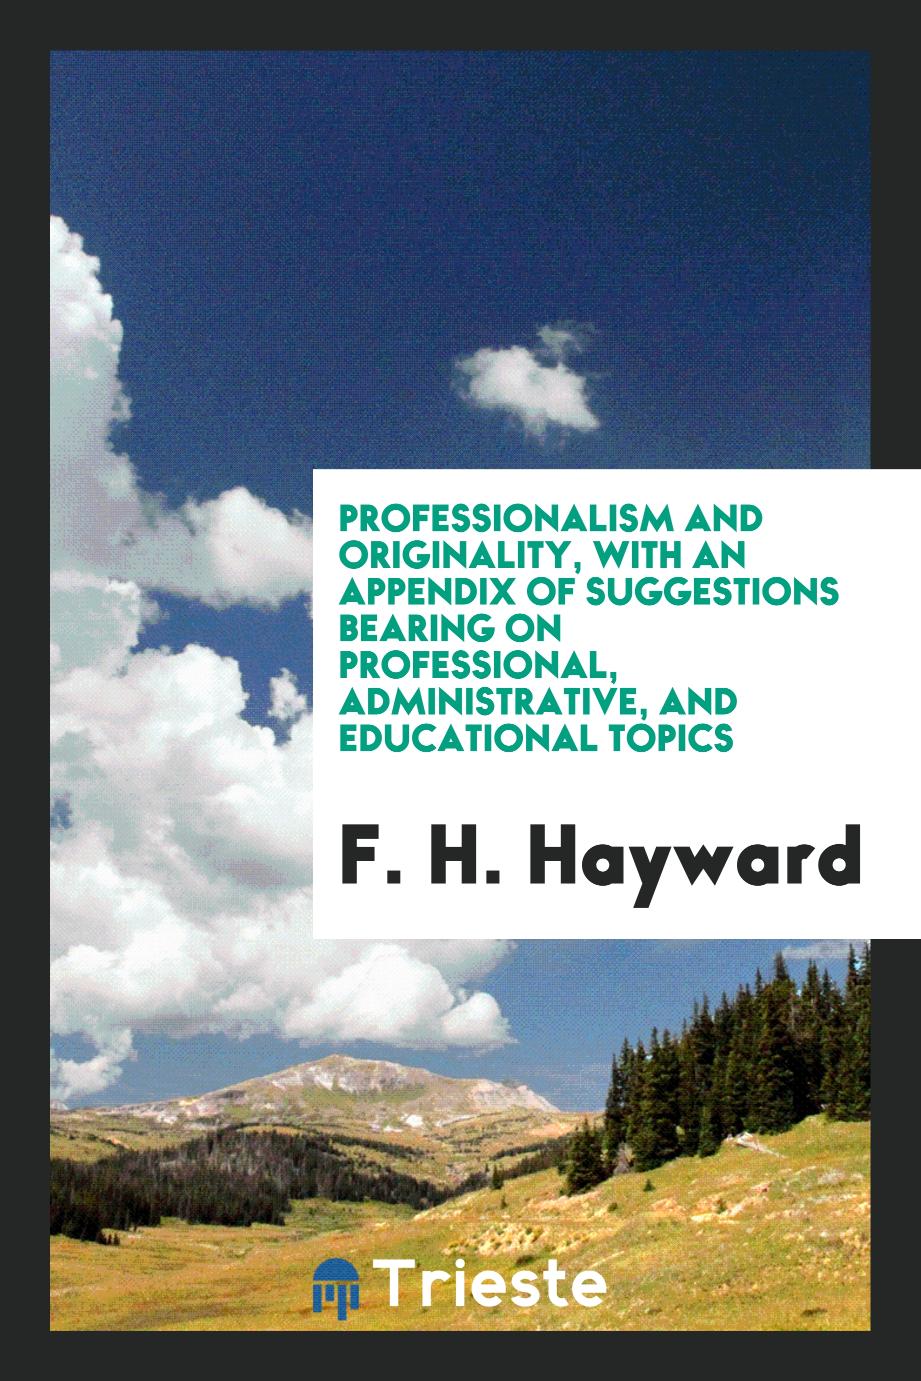 Professionalism and originality, with an appendix of suggestions bearing on professional, administrative, and educational topics